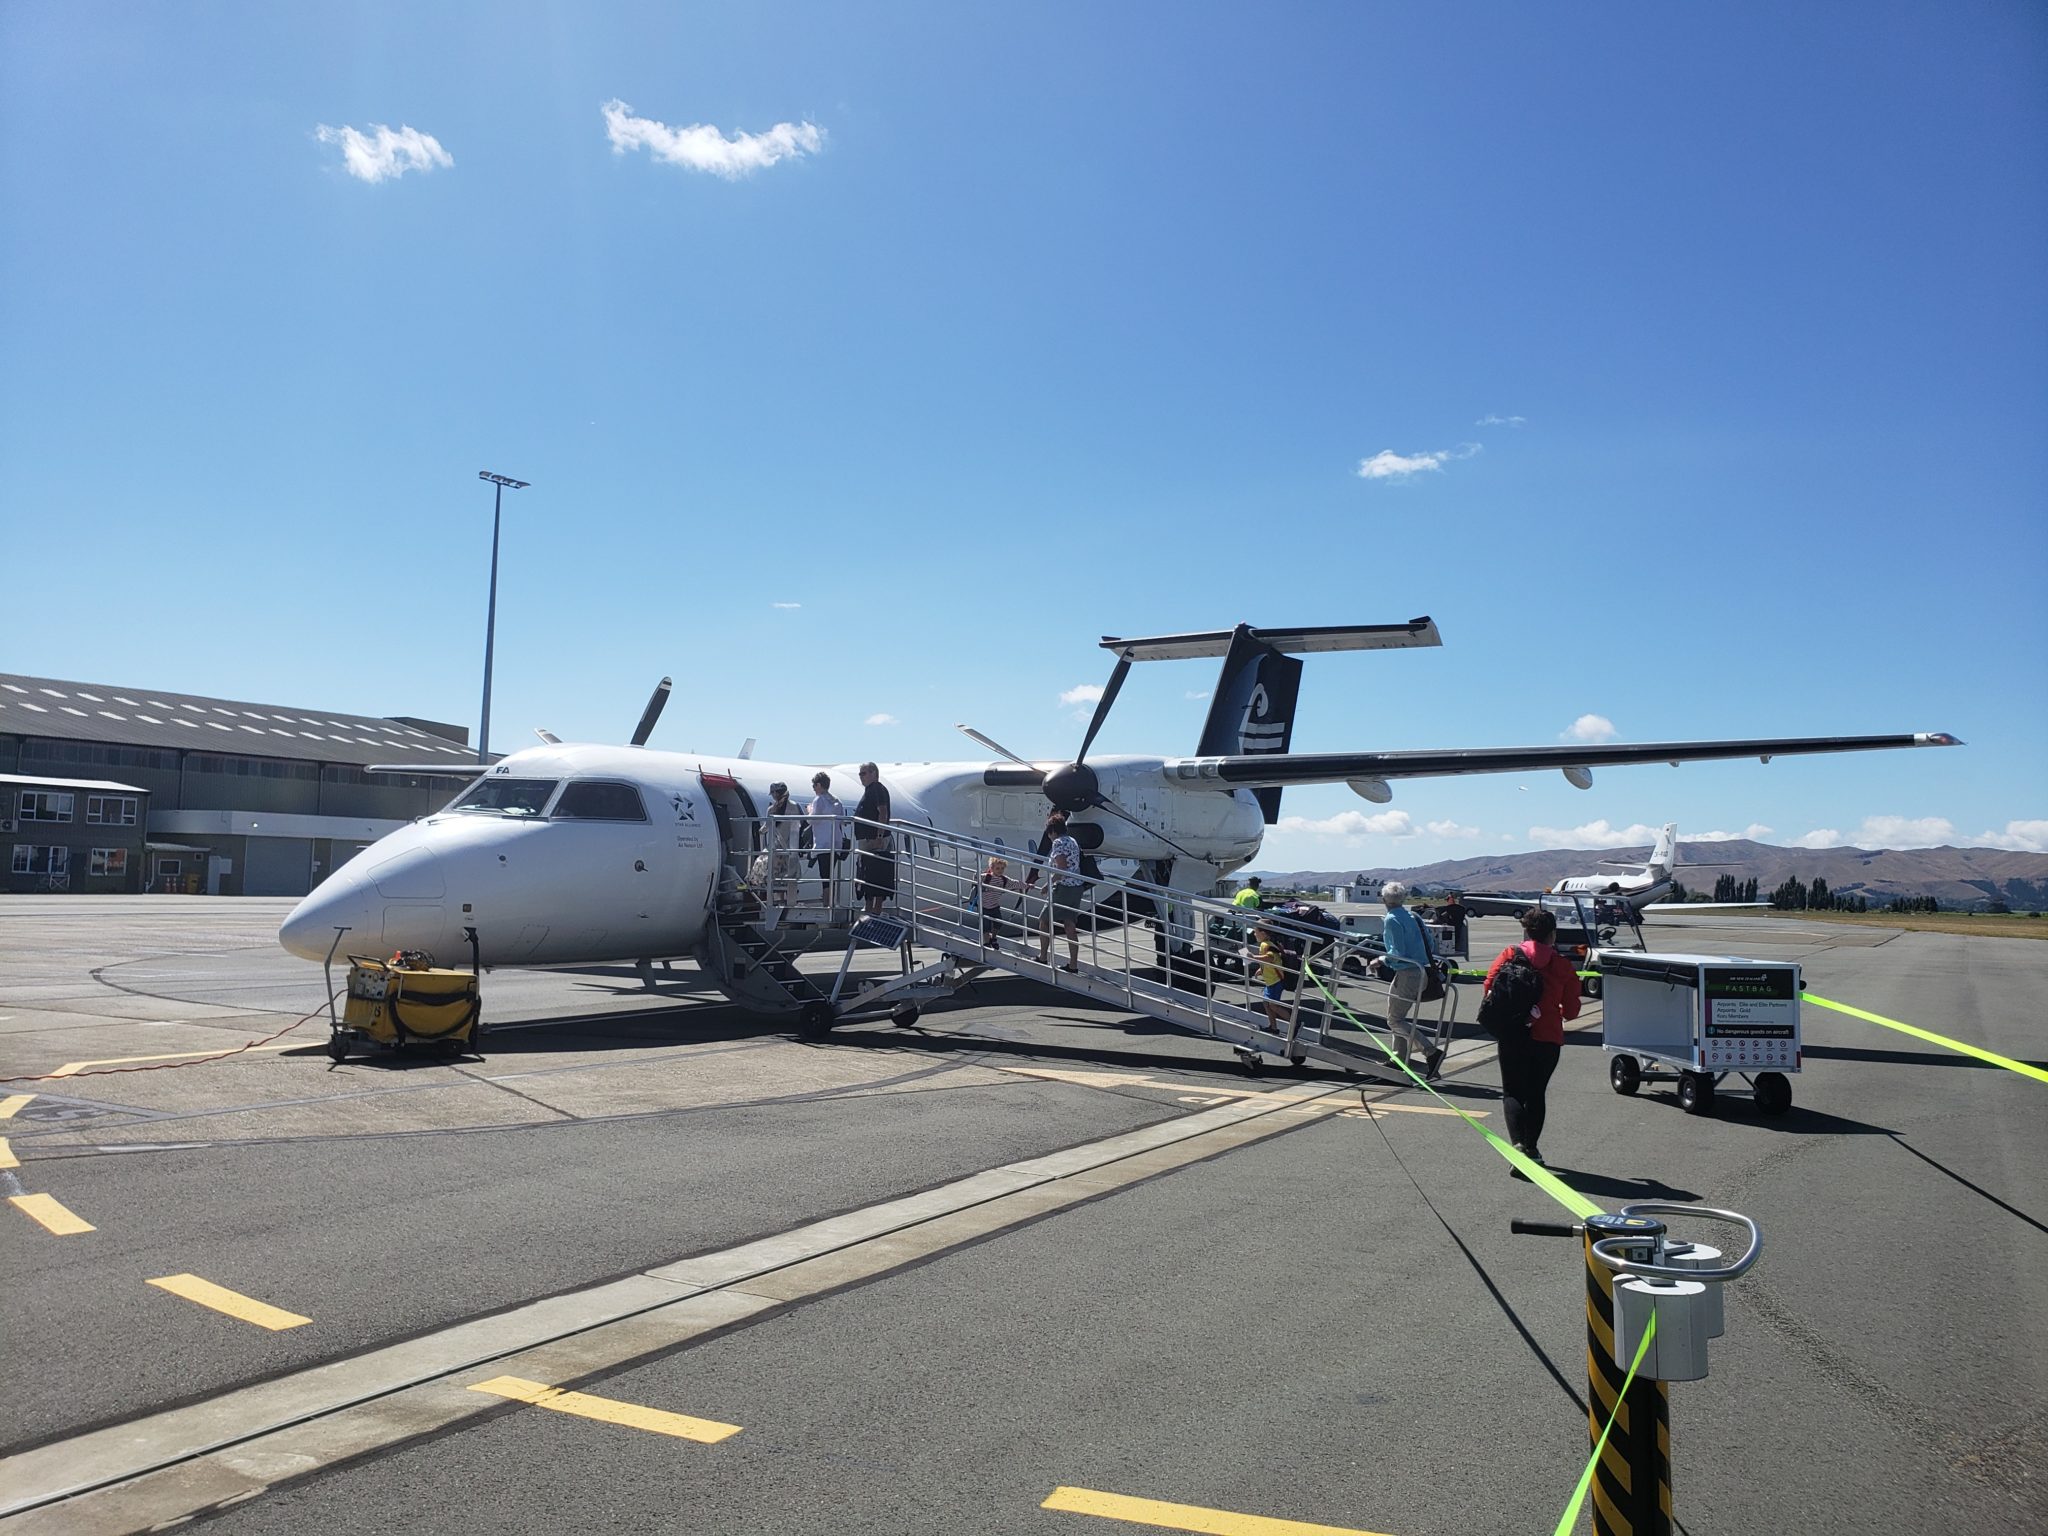 a plane with people boarding it